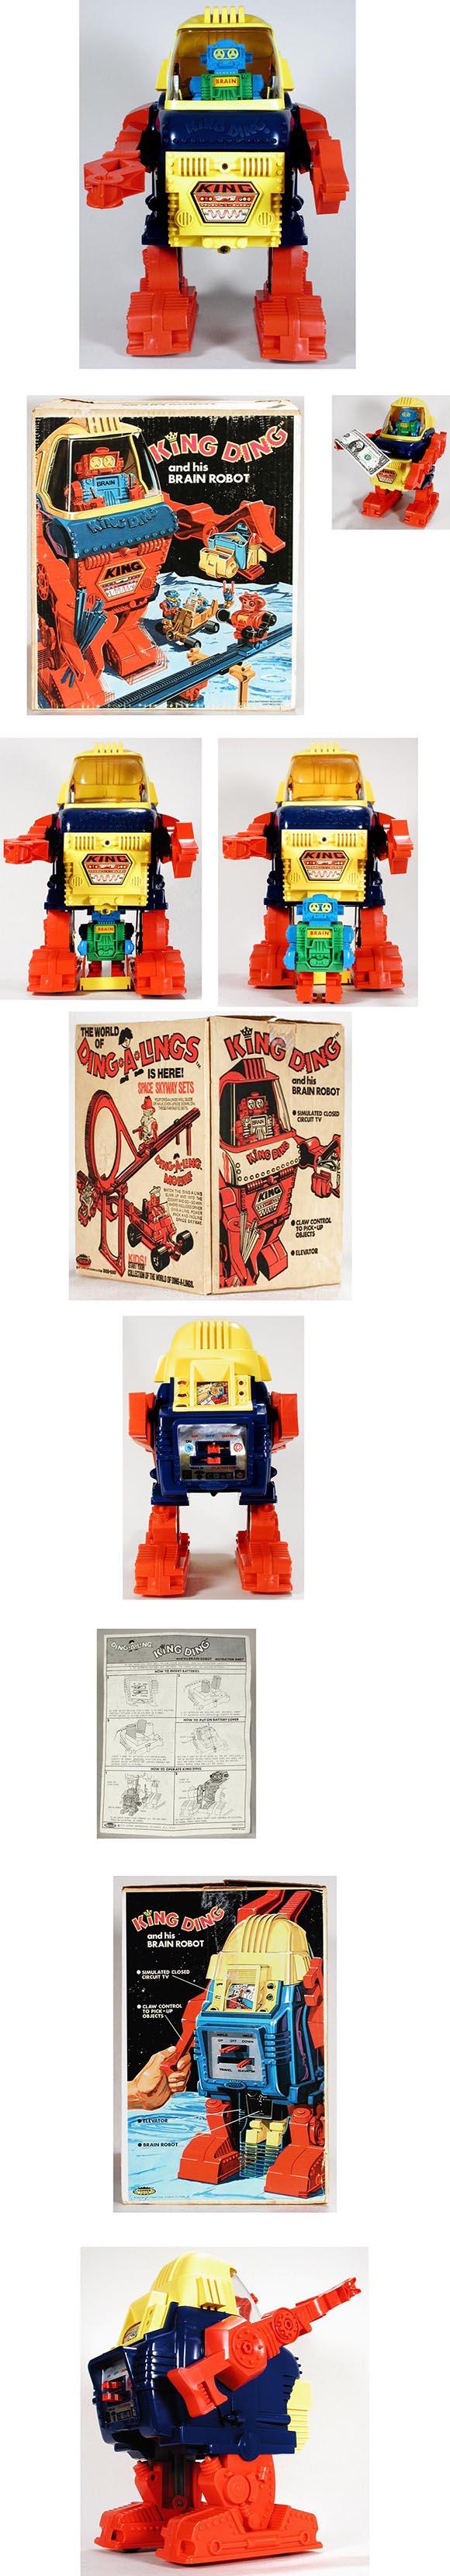 1971 Topper Toys, King Ding and His Brain RobotÂ in Original Box